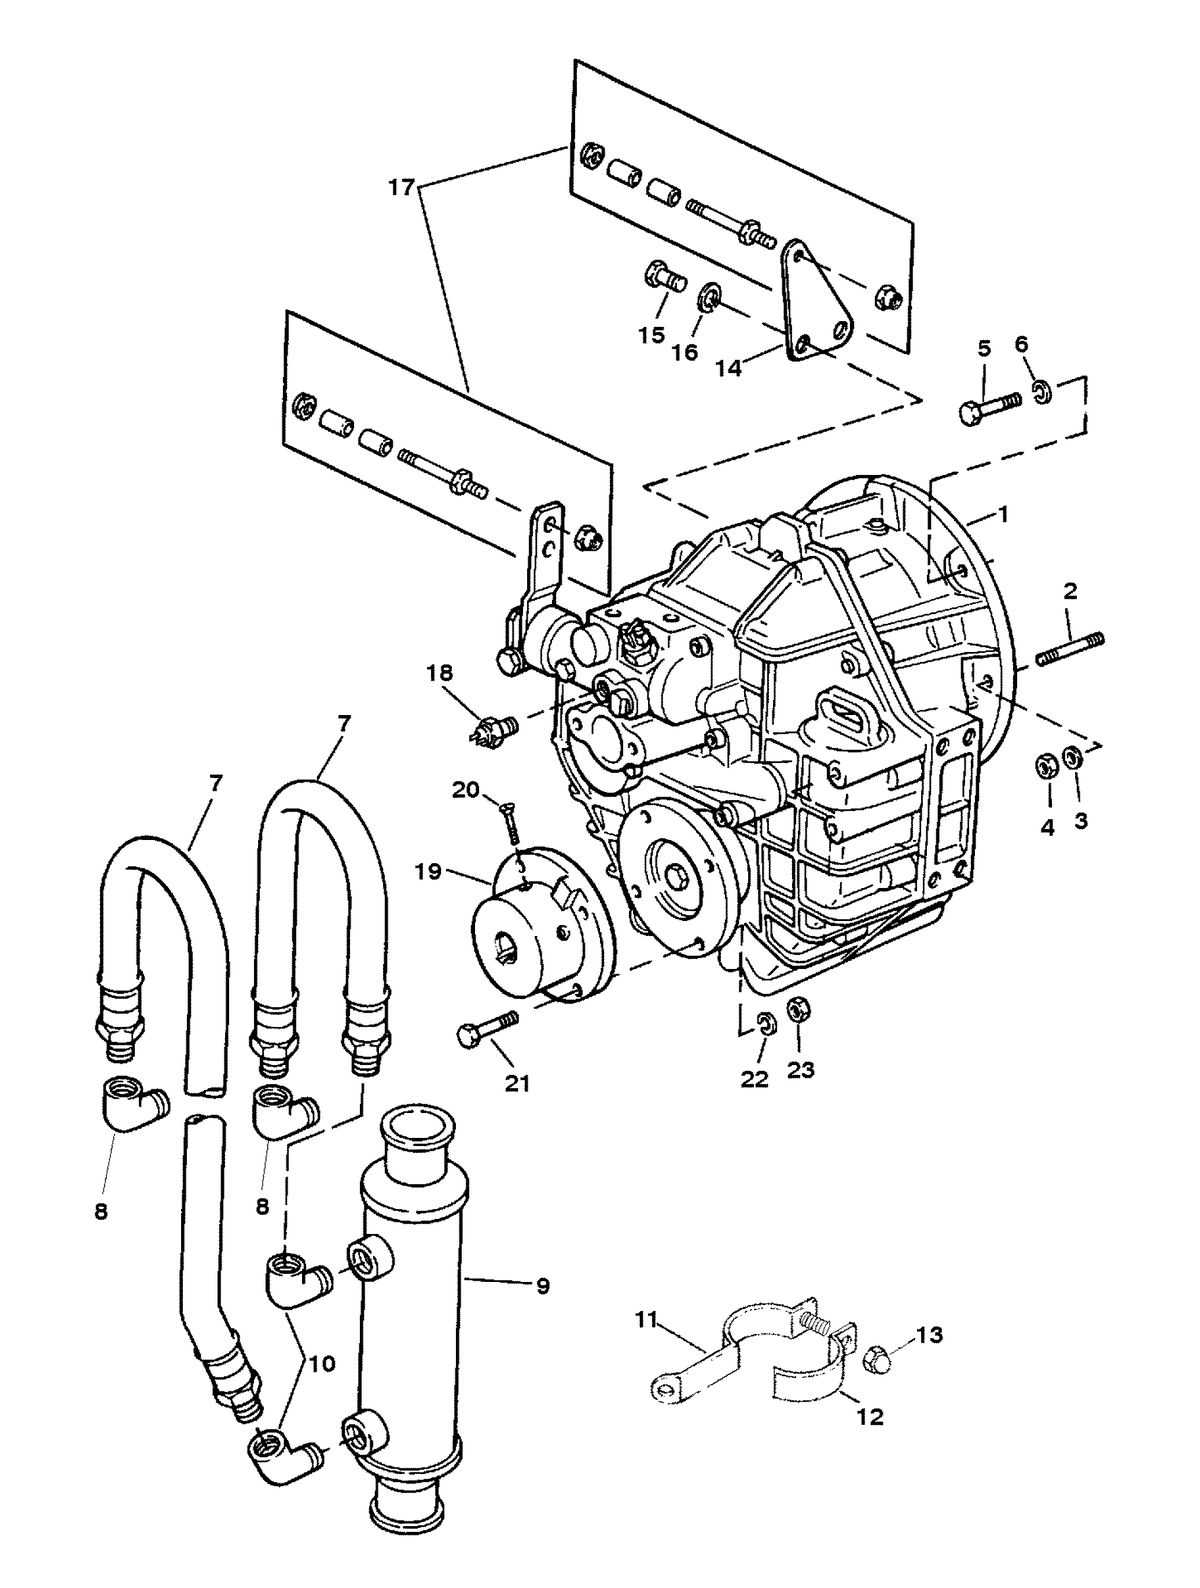 MERCRUISER MIE 5.7L INBOARD TRANSMISSION AND RELATED PARTS (HURTH 630)